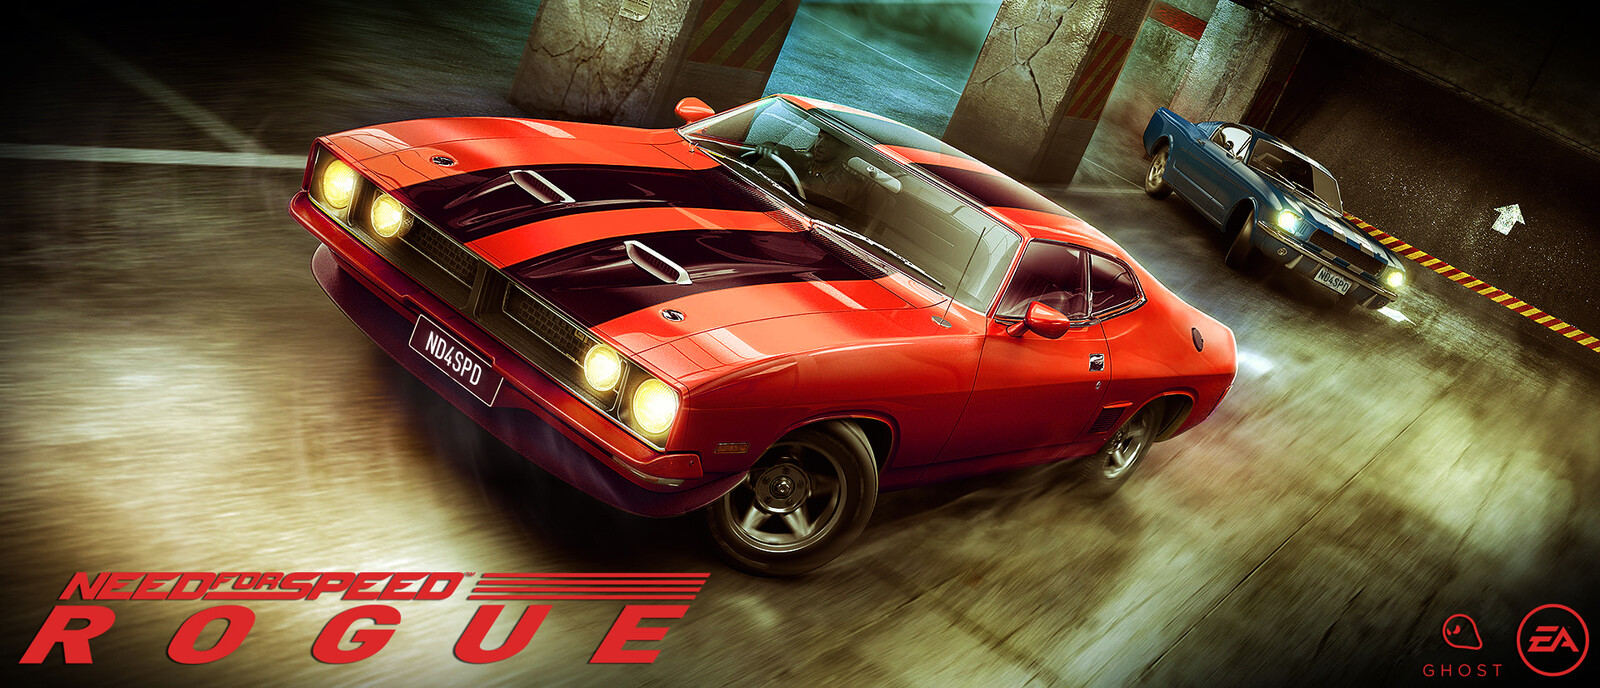 Need for Speed Rogue (Americana-styled splash screen - 02)